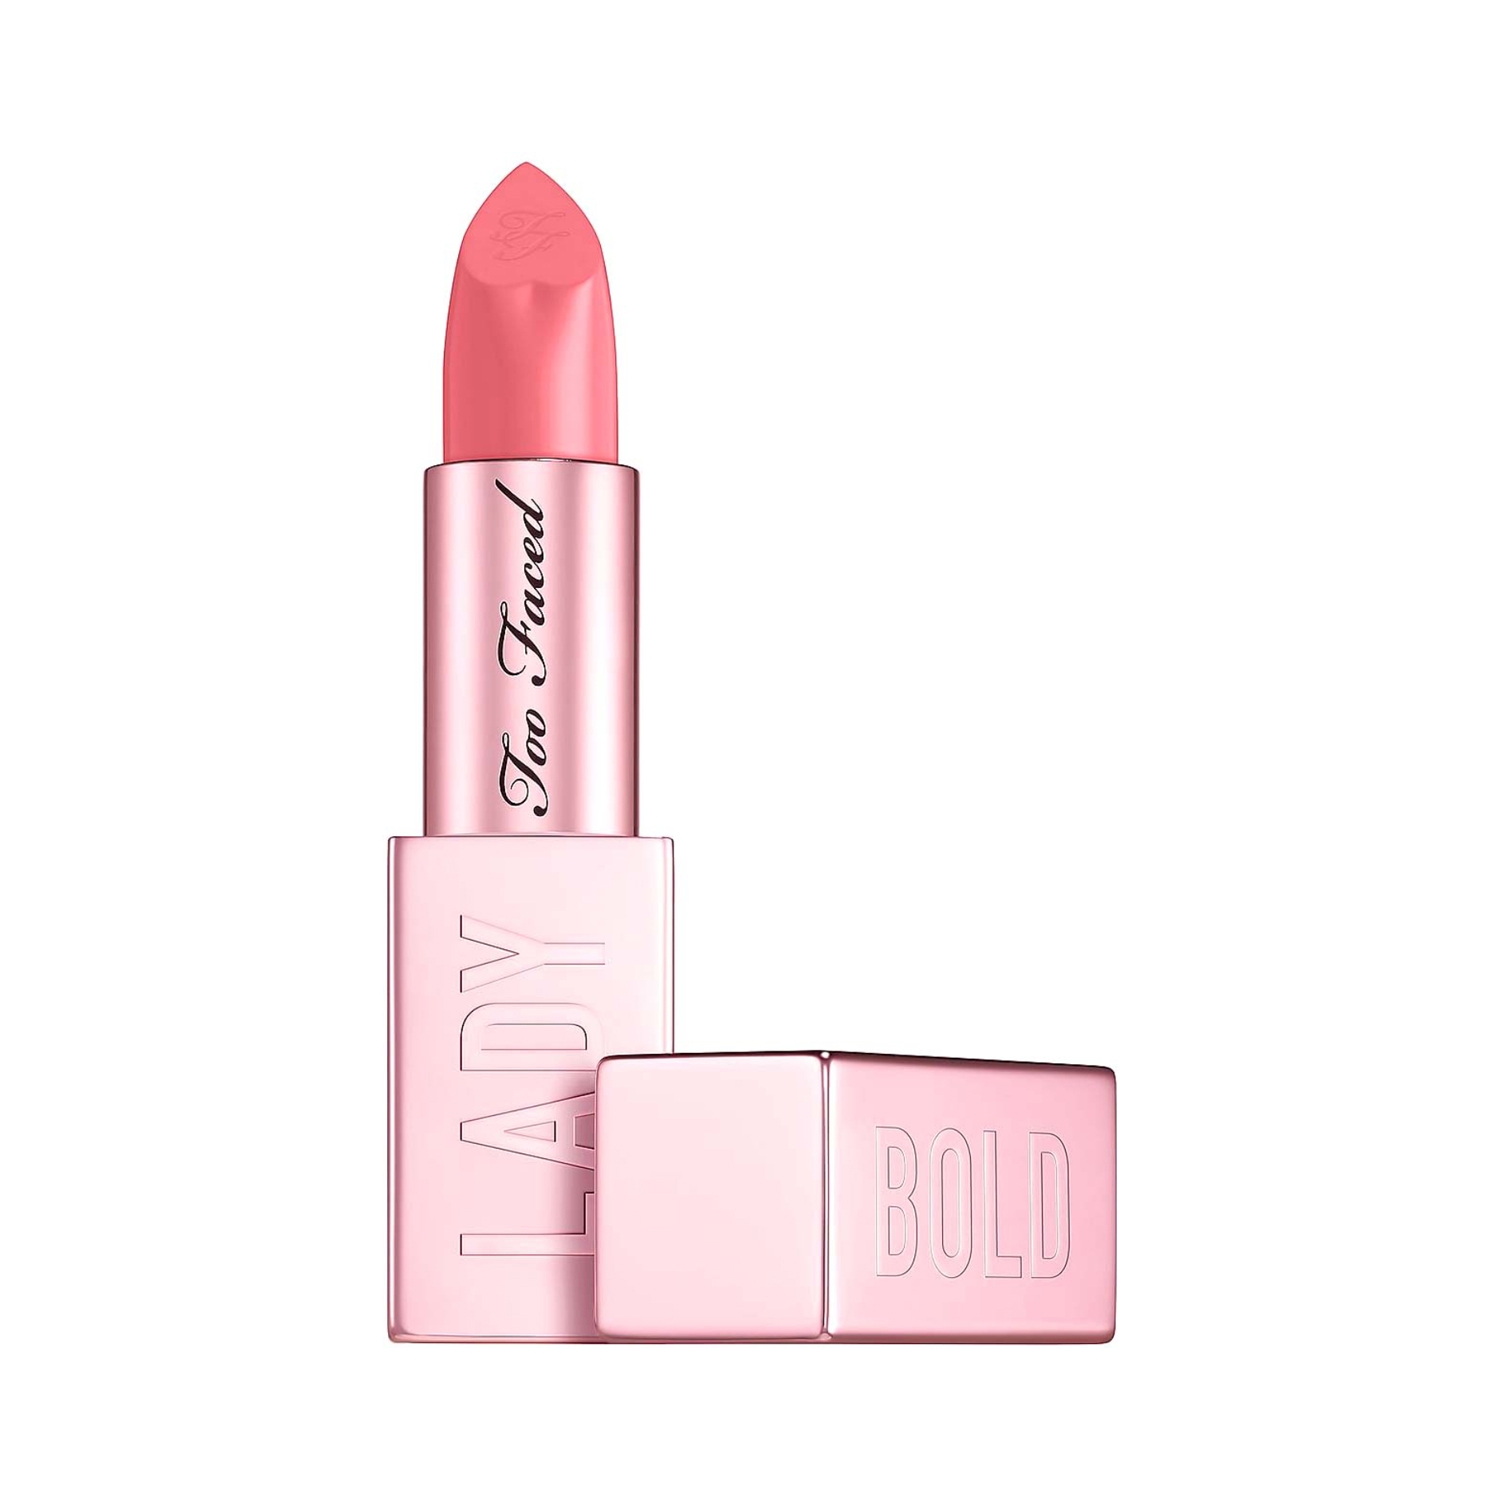 Too Faced | Too Faced Lady Bold Cream Lipstick - Hype Woman (4g)